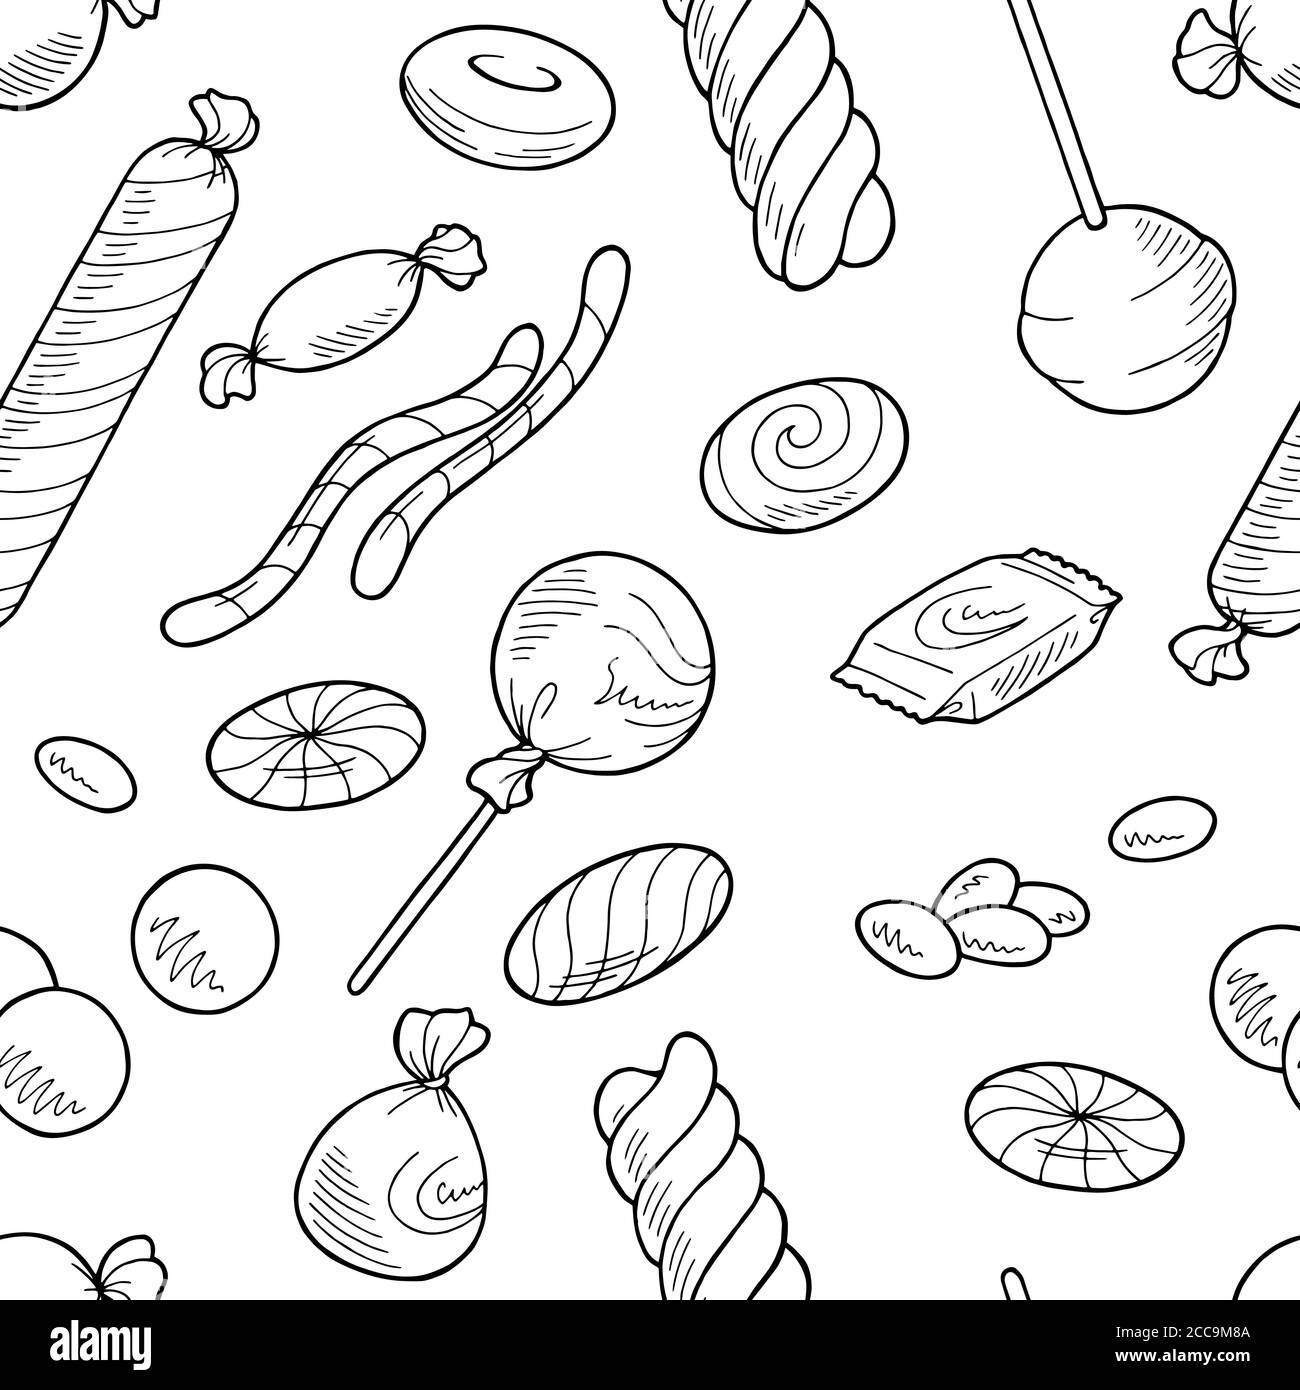 Candy graphic sweet food black white seamless pattern background sketch illustration vector Stock Vector